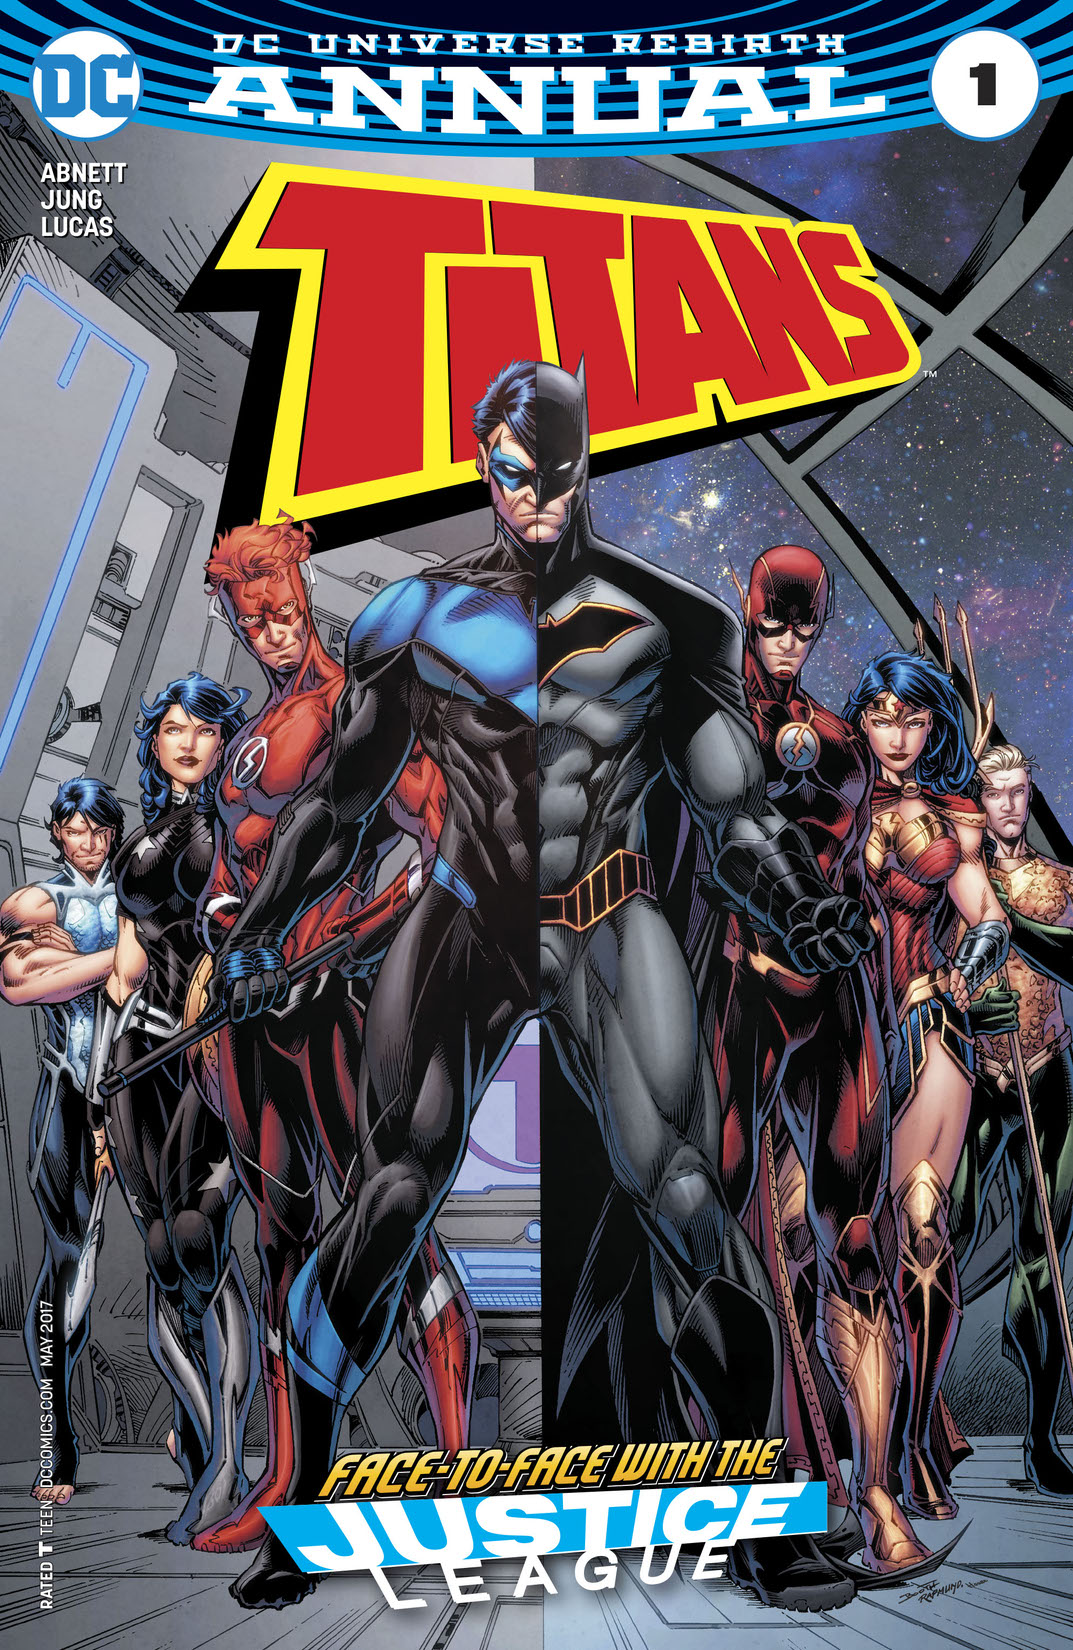 Titans Annual (Rebirth) (2017-) #1 preview images